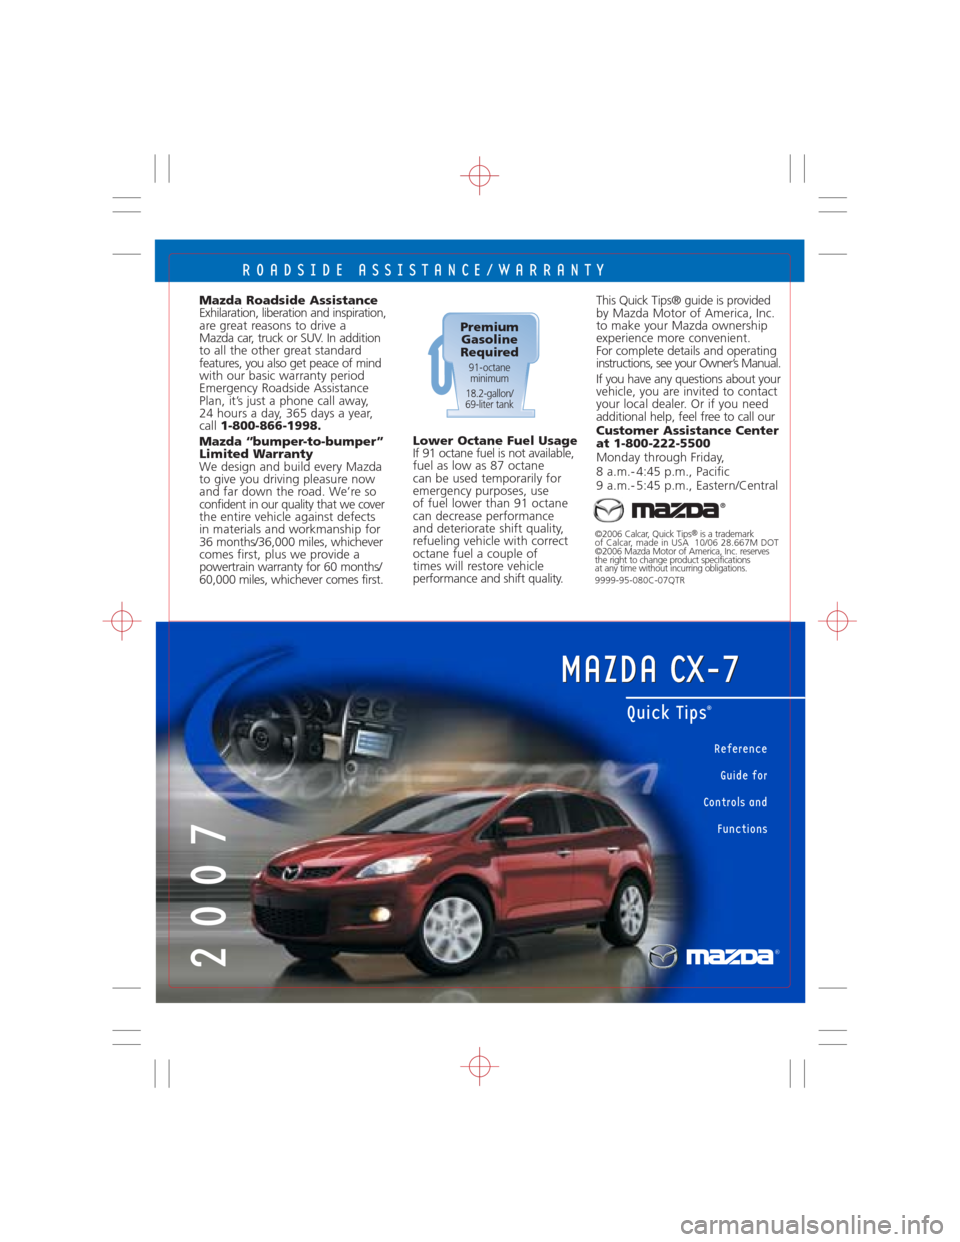 MAZDA MODEL CX-7 2007  Quick Tips (in English) This Quick Tips® guide is provided
by Mazda Motor of America, Inc.
to make your Mazda ownership
experience more convenient. 
For complete details and operating
instructions, see your Owner’s Manual